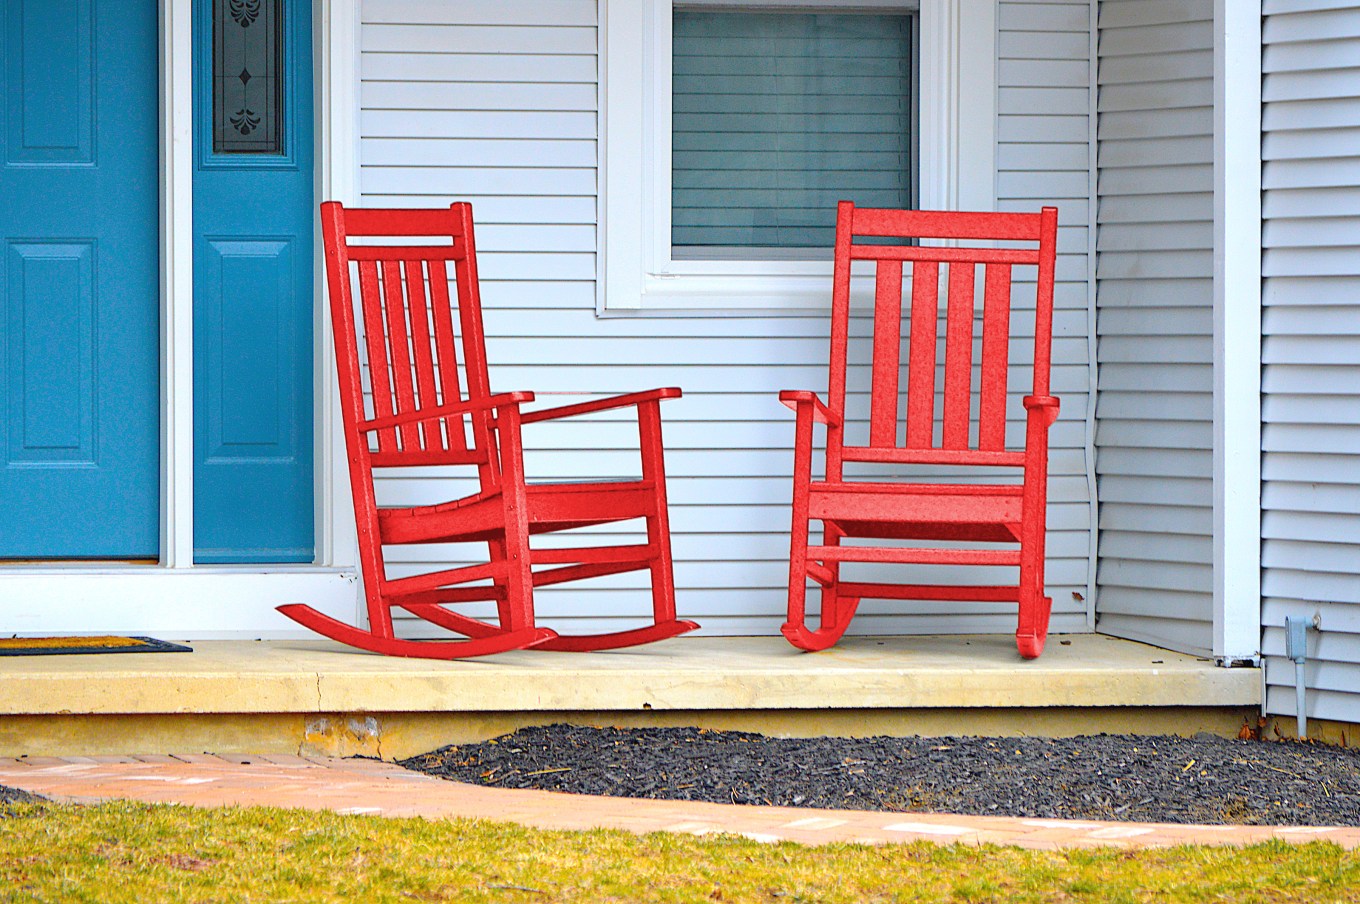 Vibrant, red rocking chairs sit on a porch adding a pop of color.